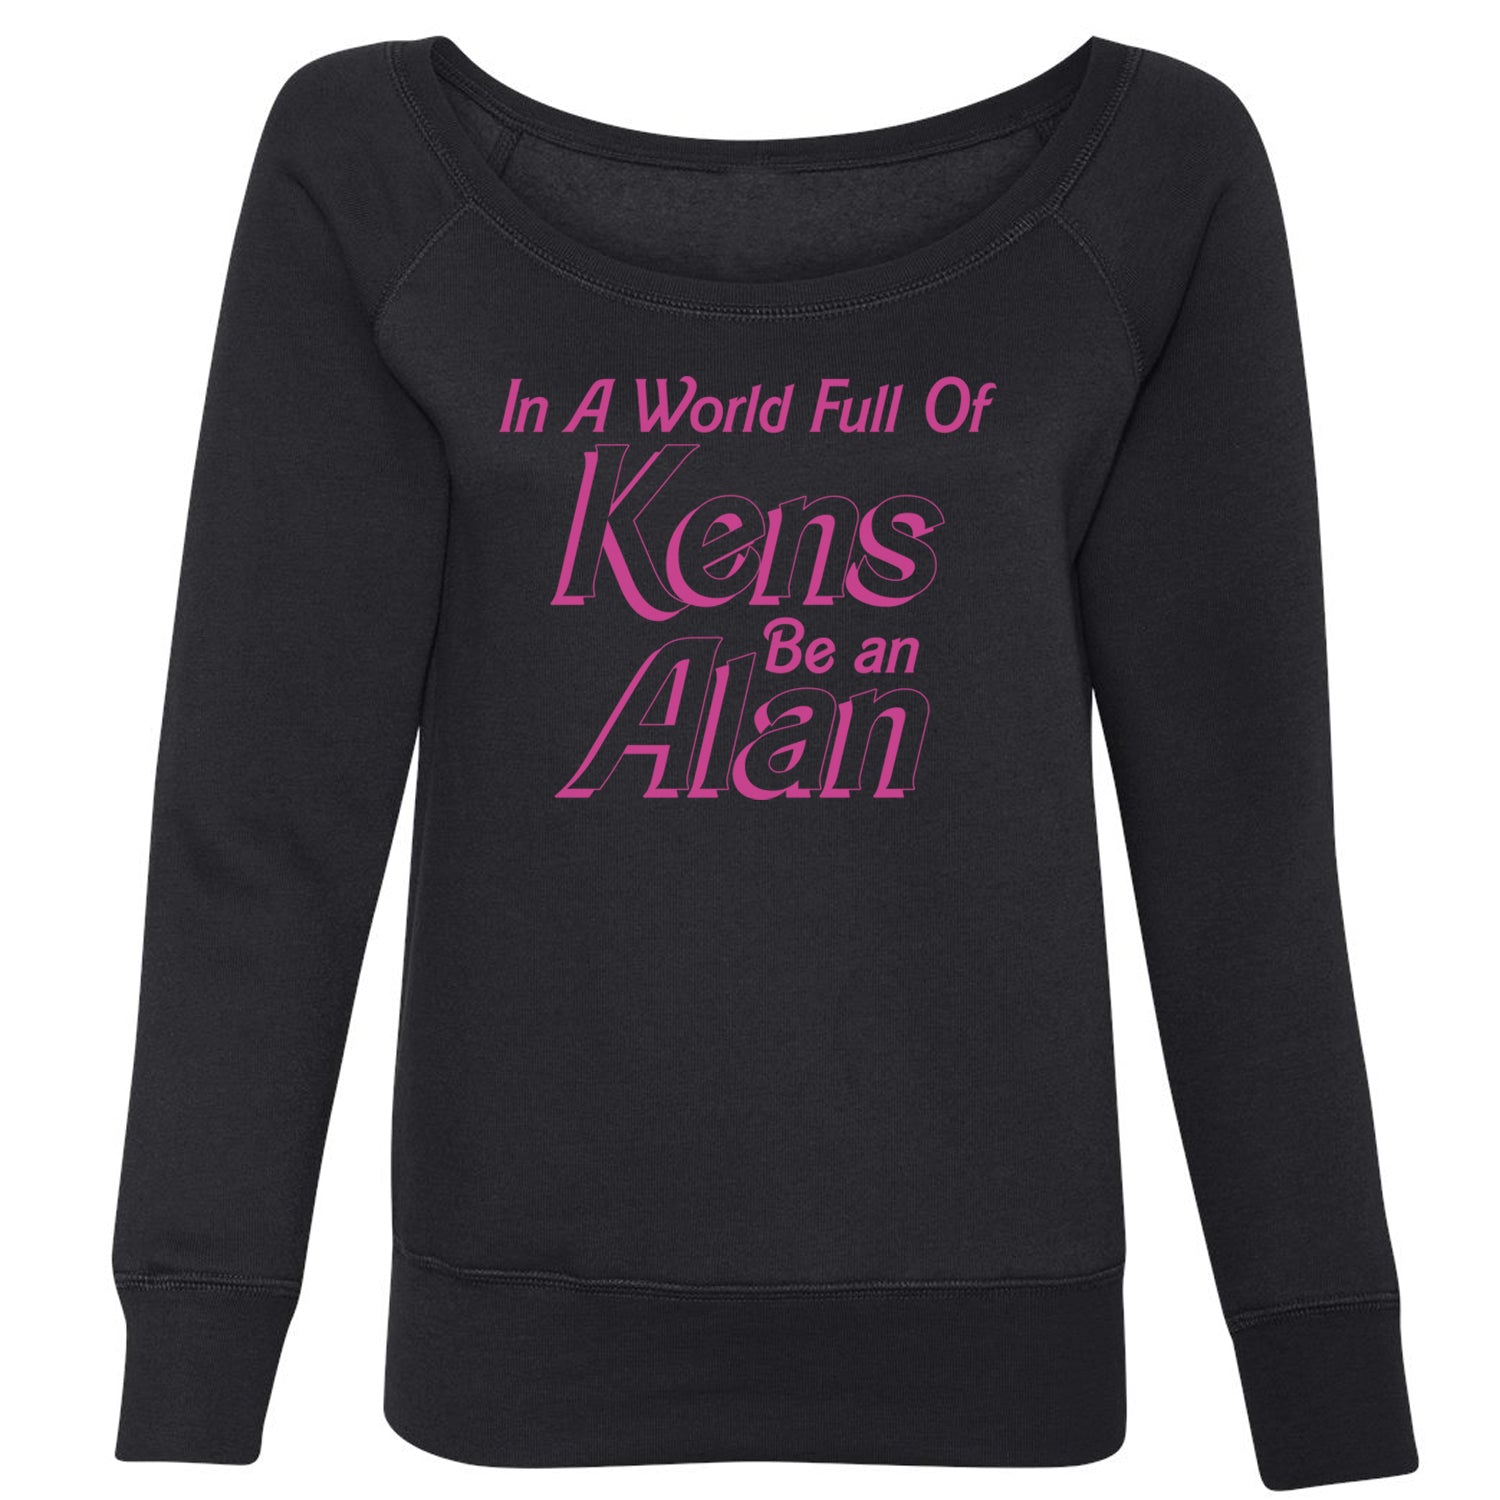 In A World Full Of Kens, Be an Alan Slouchy Off Shoulder Oversized Sweatshirt